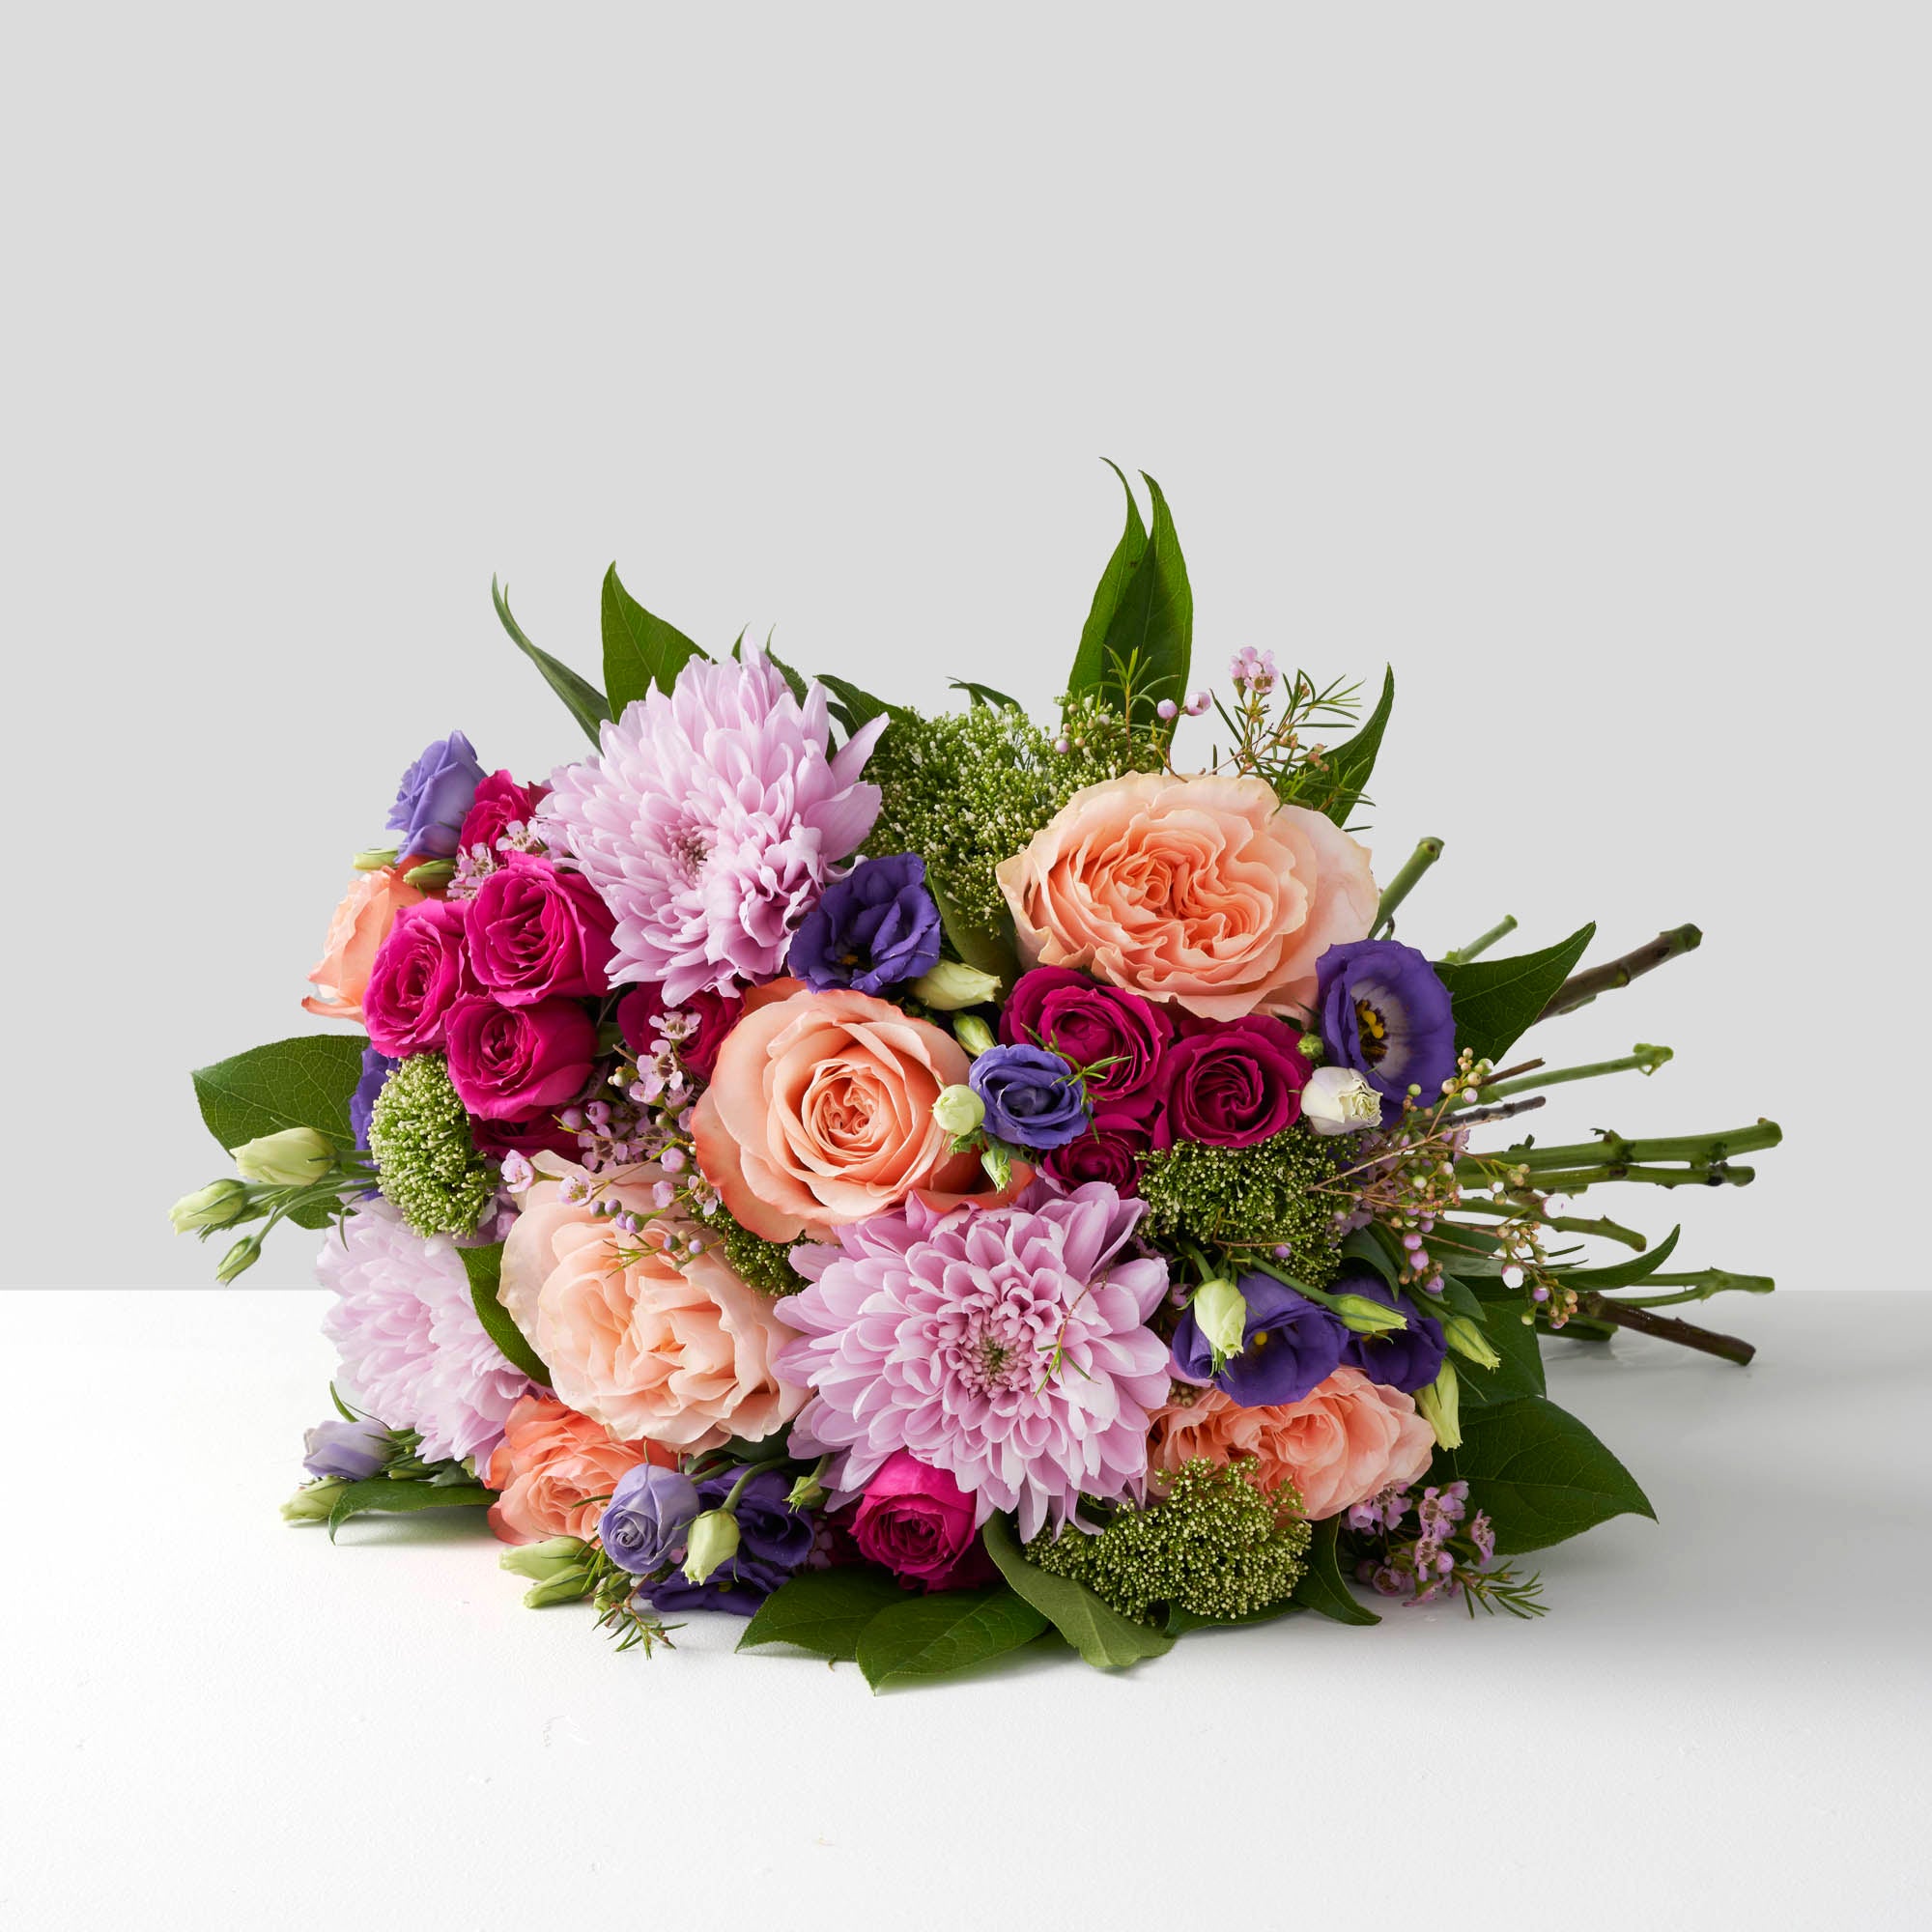 Handtied bouquet of lavender chrysanthemums, peach roses, fuchsia spray roses and purple lisianthus on white background.